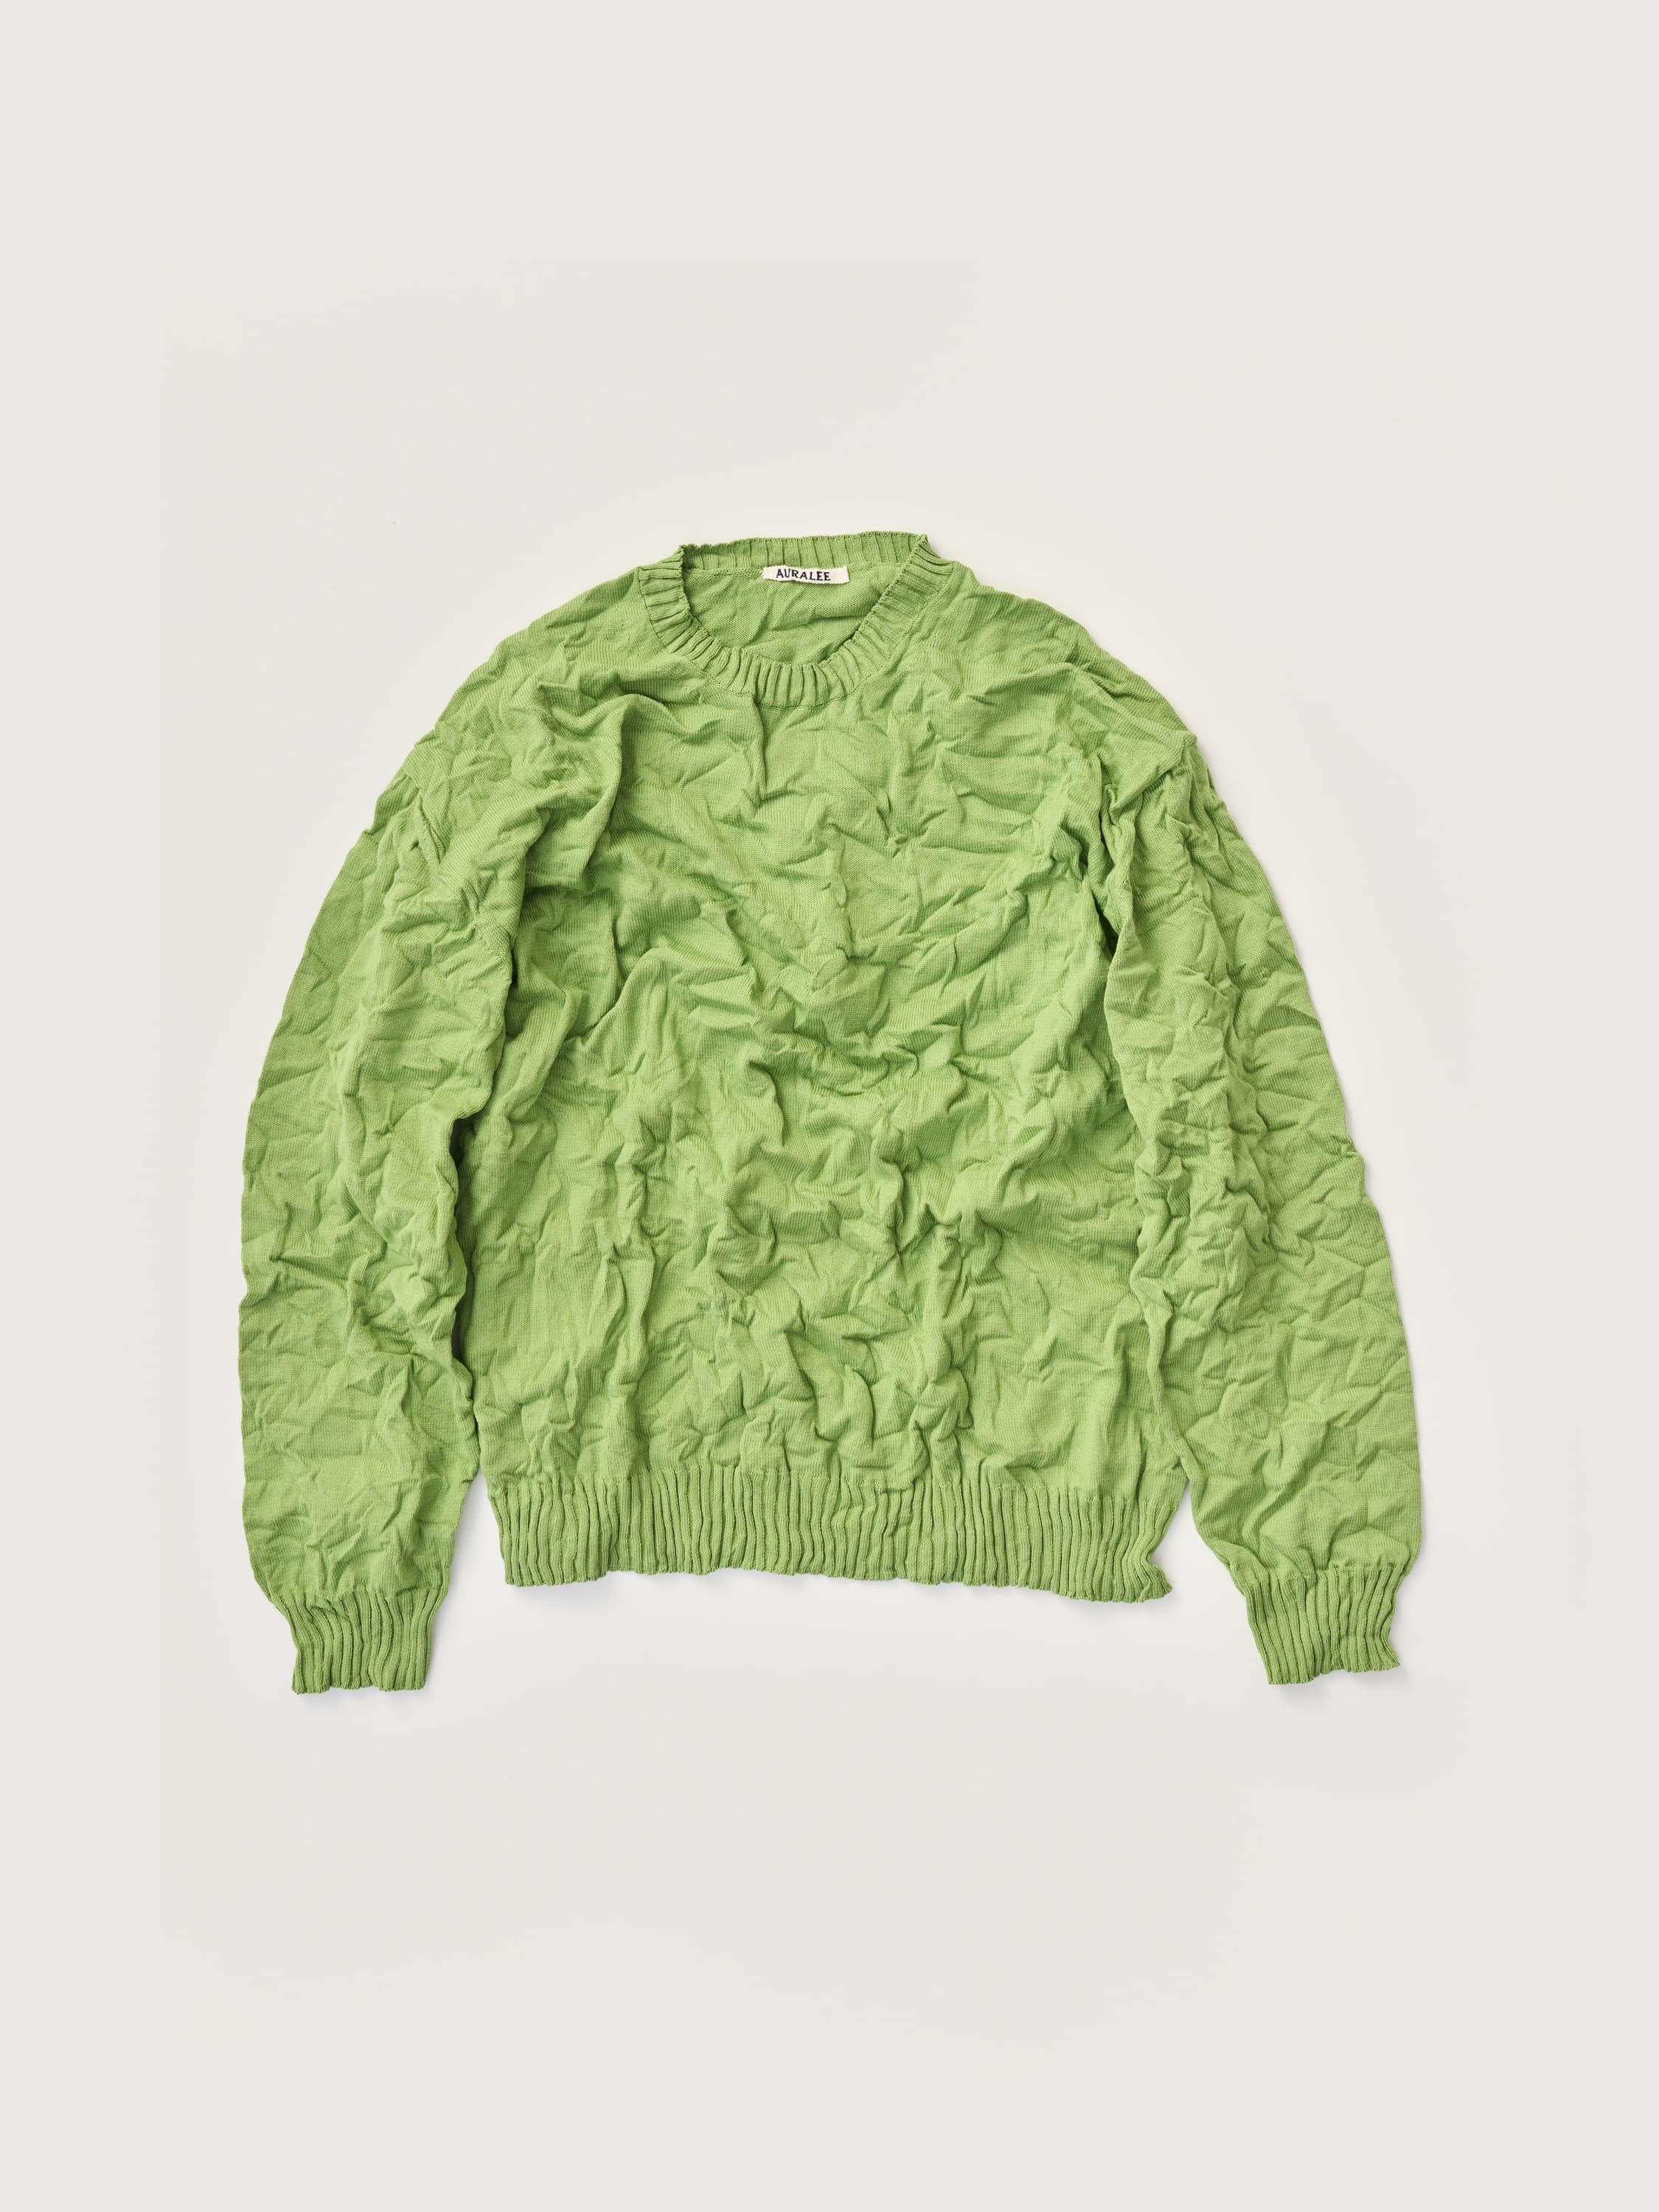 WRINKLED DRY COTTON KNIT P/O 詳細画像 SAGE GREEN 4